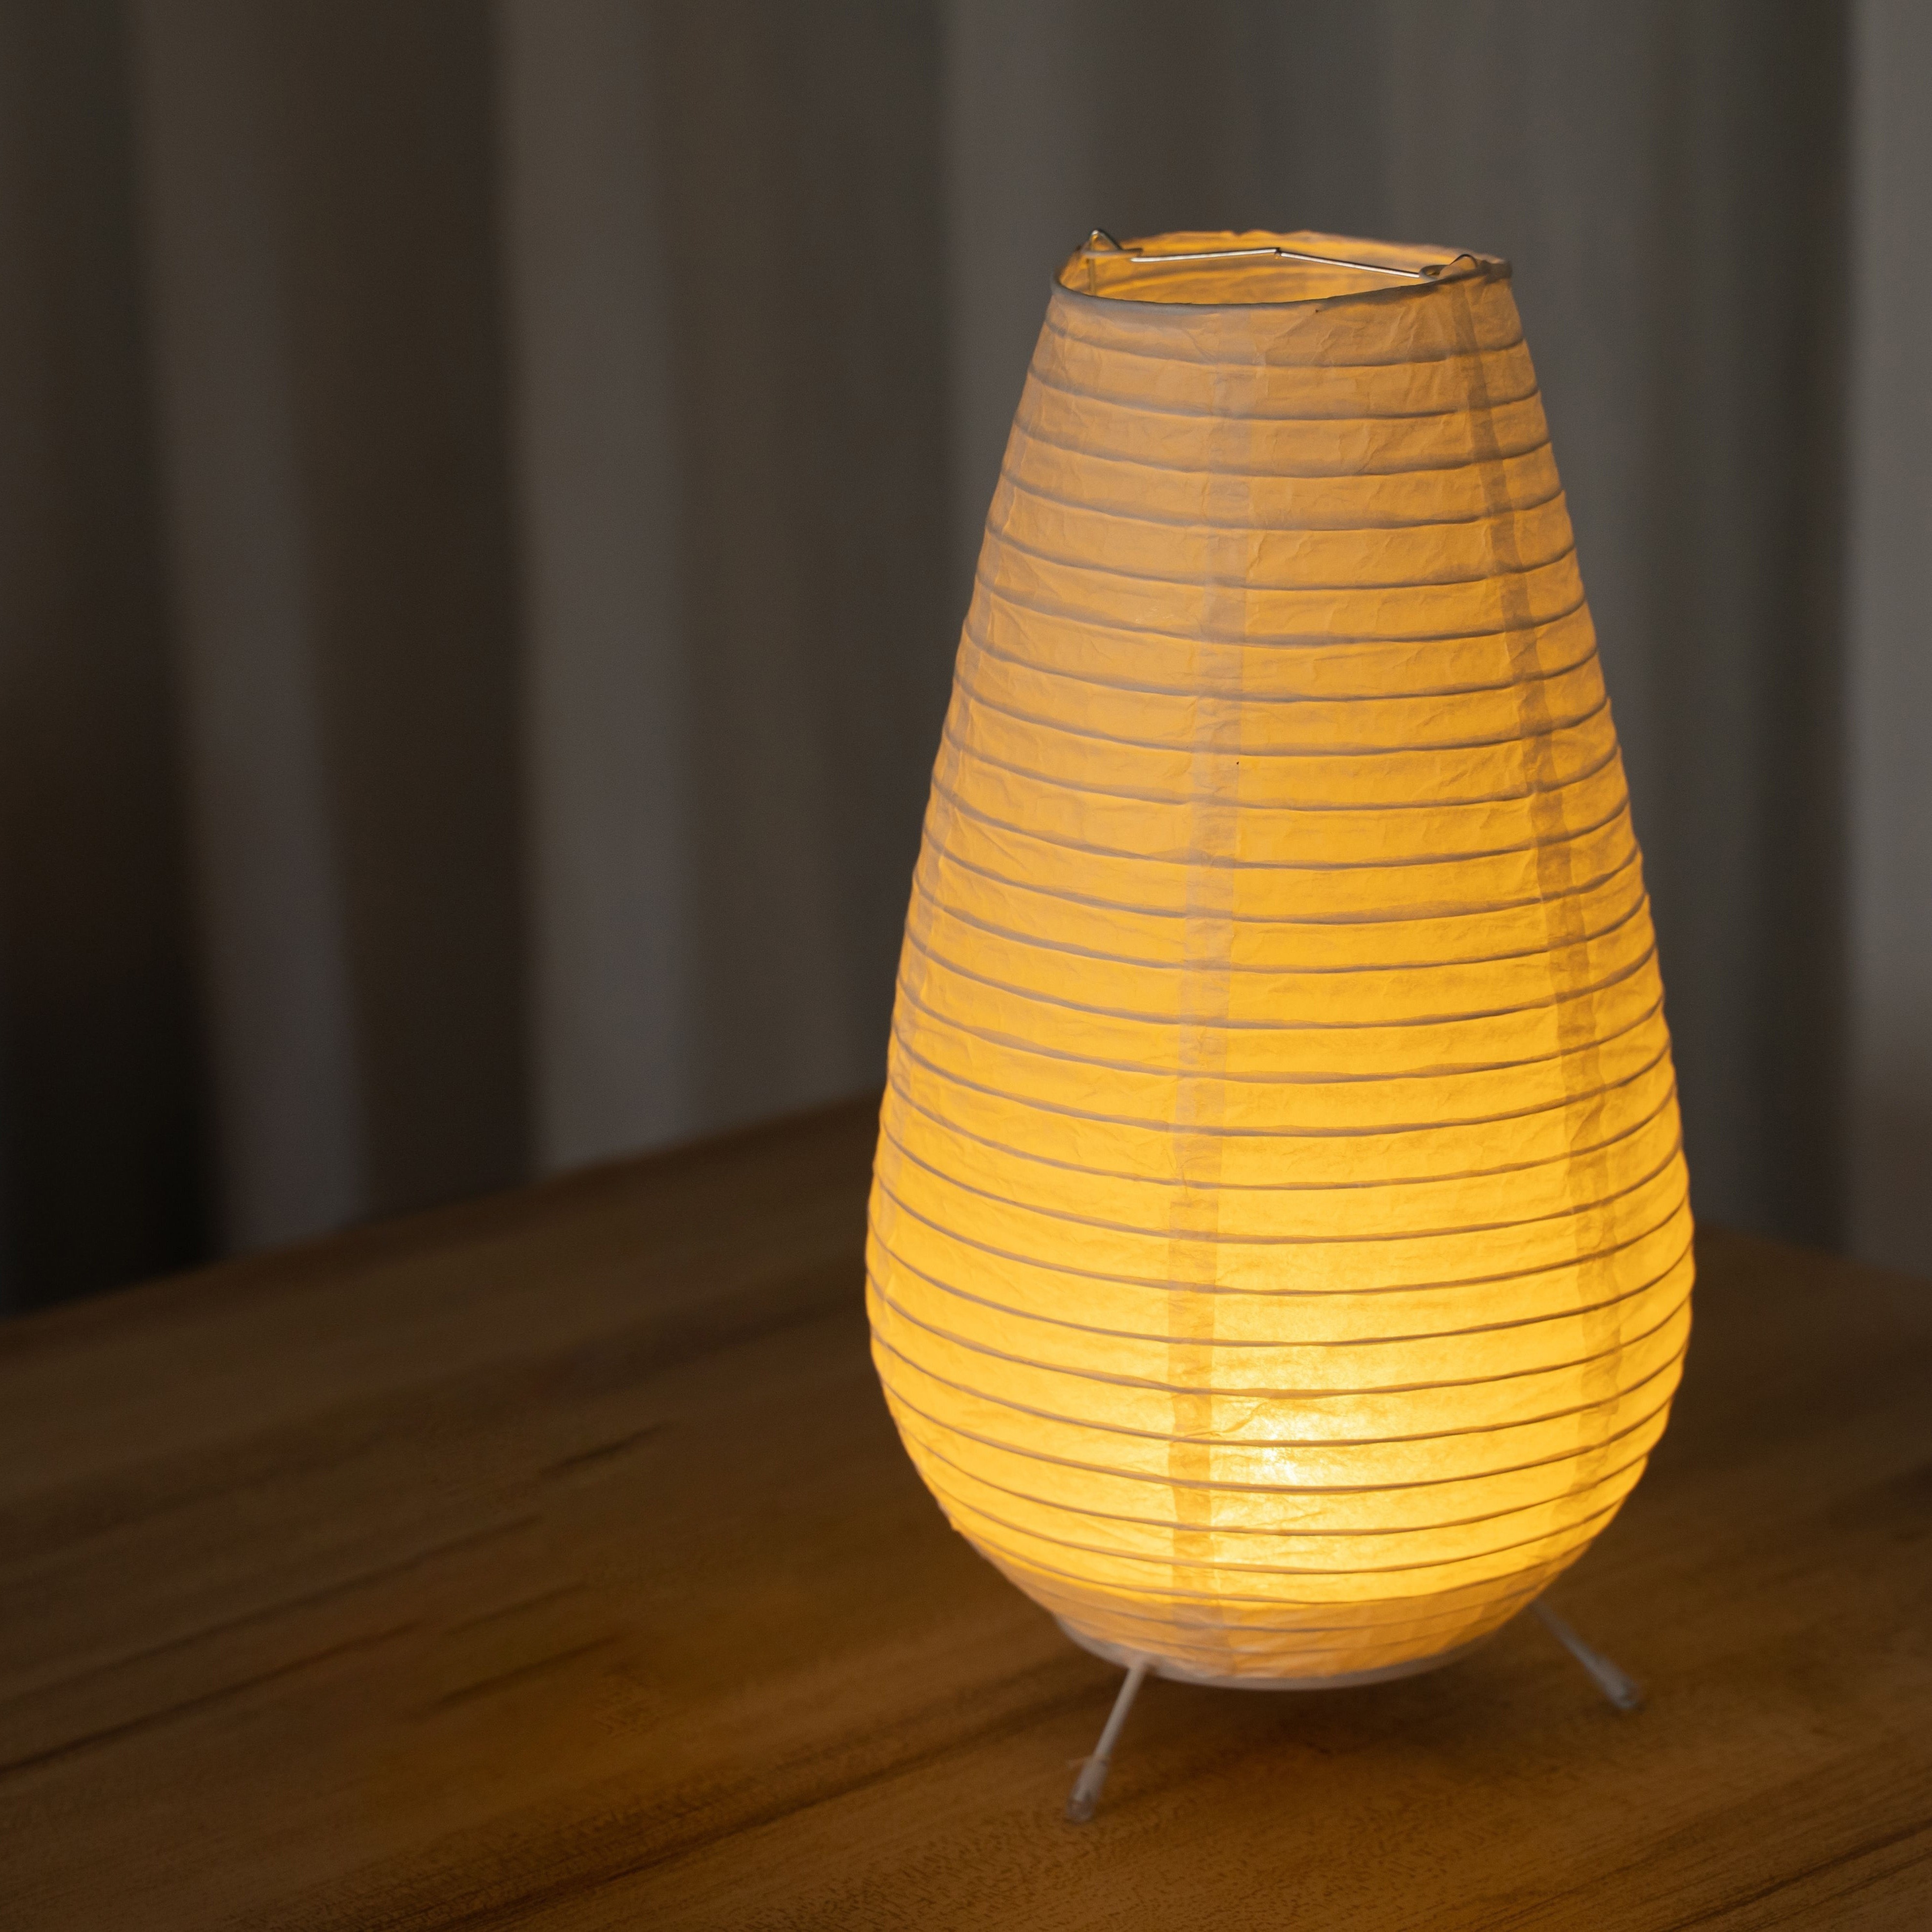 Paper Lantern Table Lamp Decorative Paper Lamp For Office Bedroom